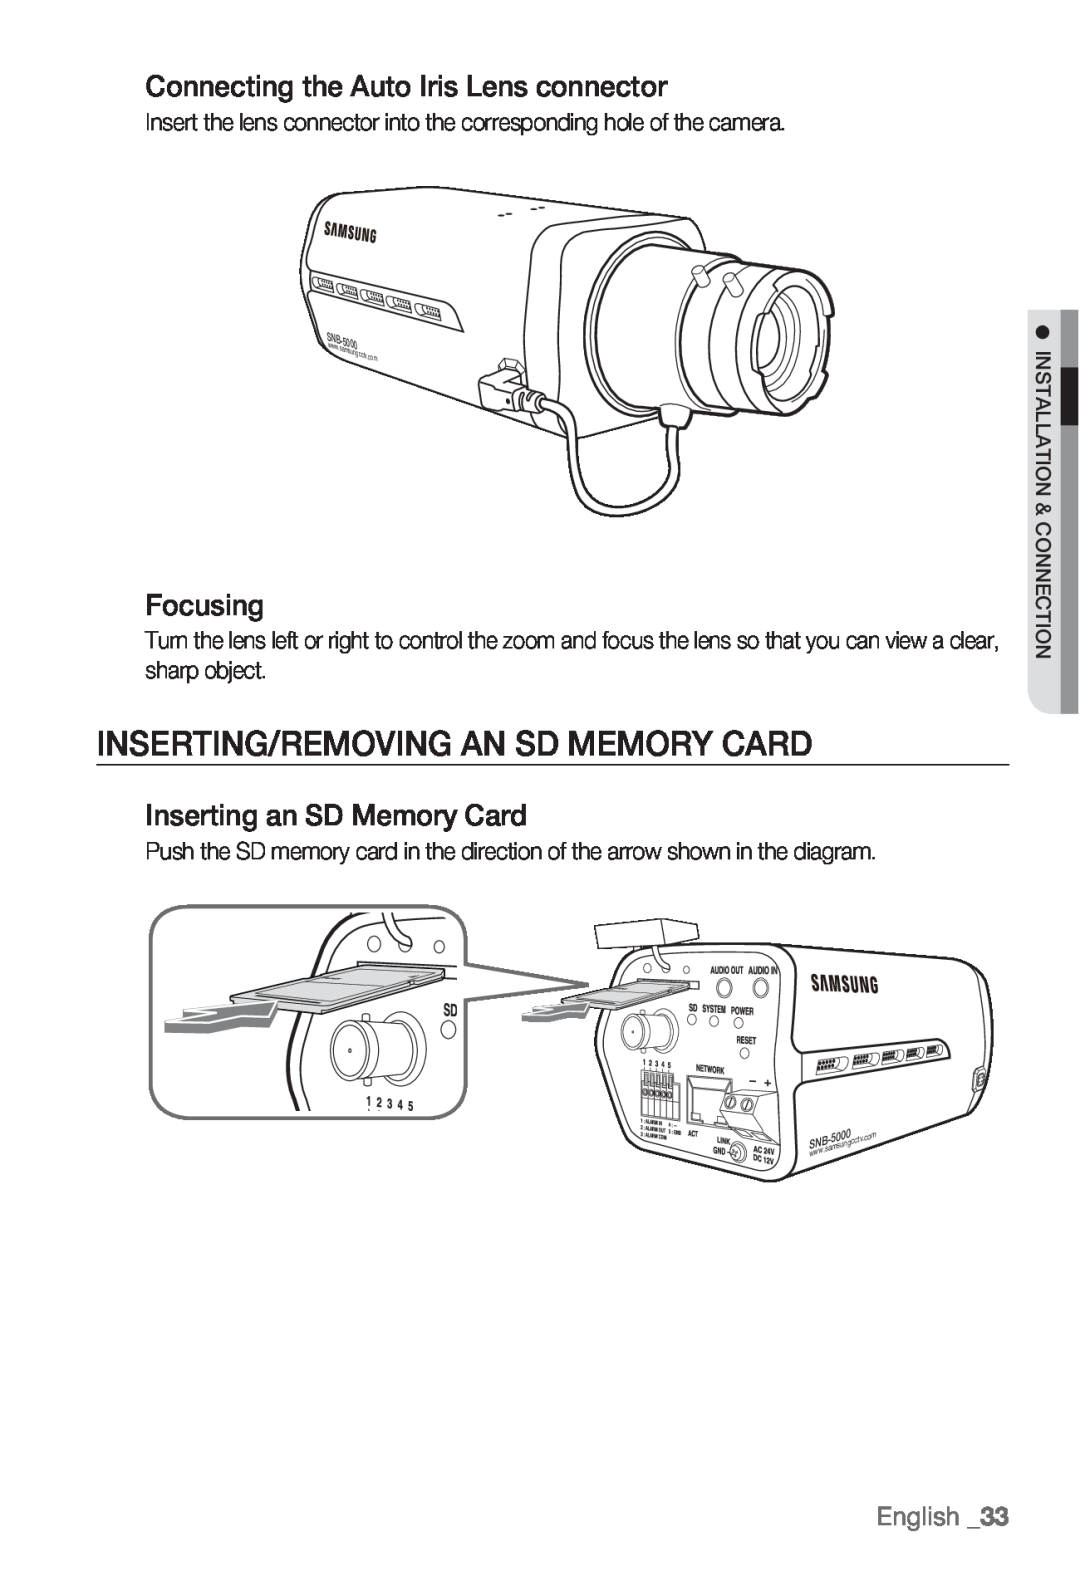 Samsung SND-5080F Inserting/Removing An Sd Memory Card, Connecting the Auto Iris Lens connector, Focusing, English 